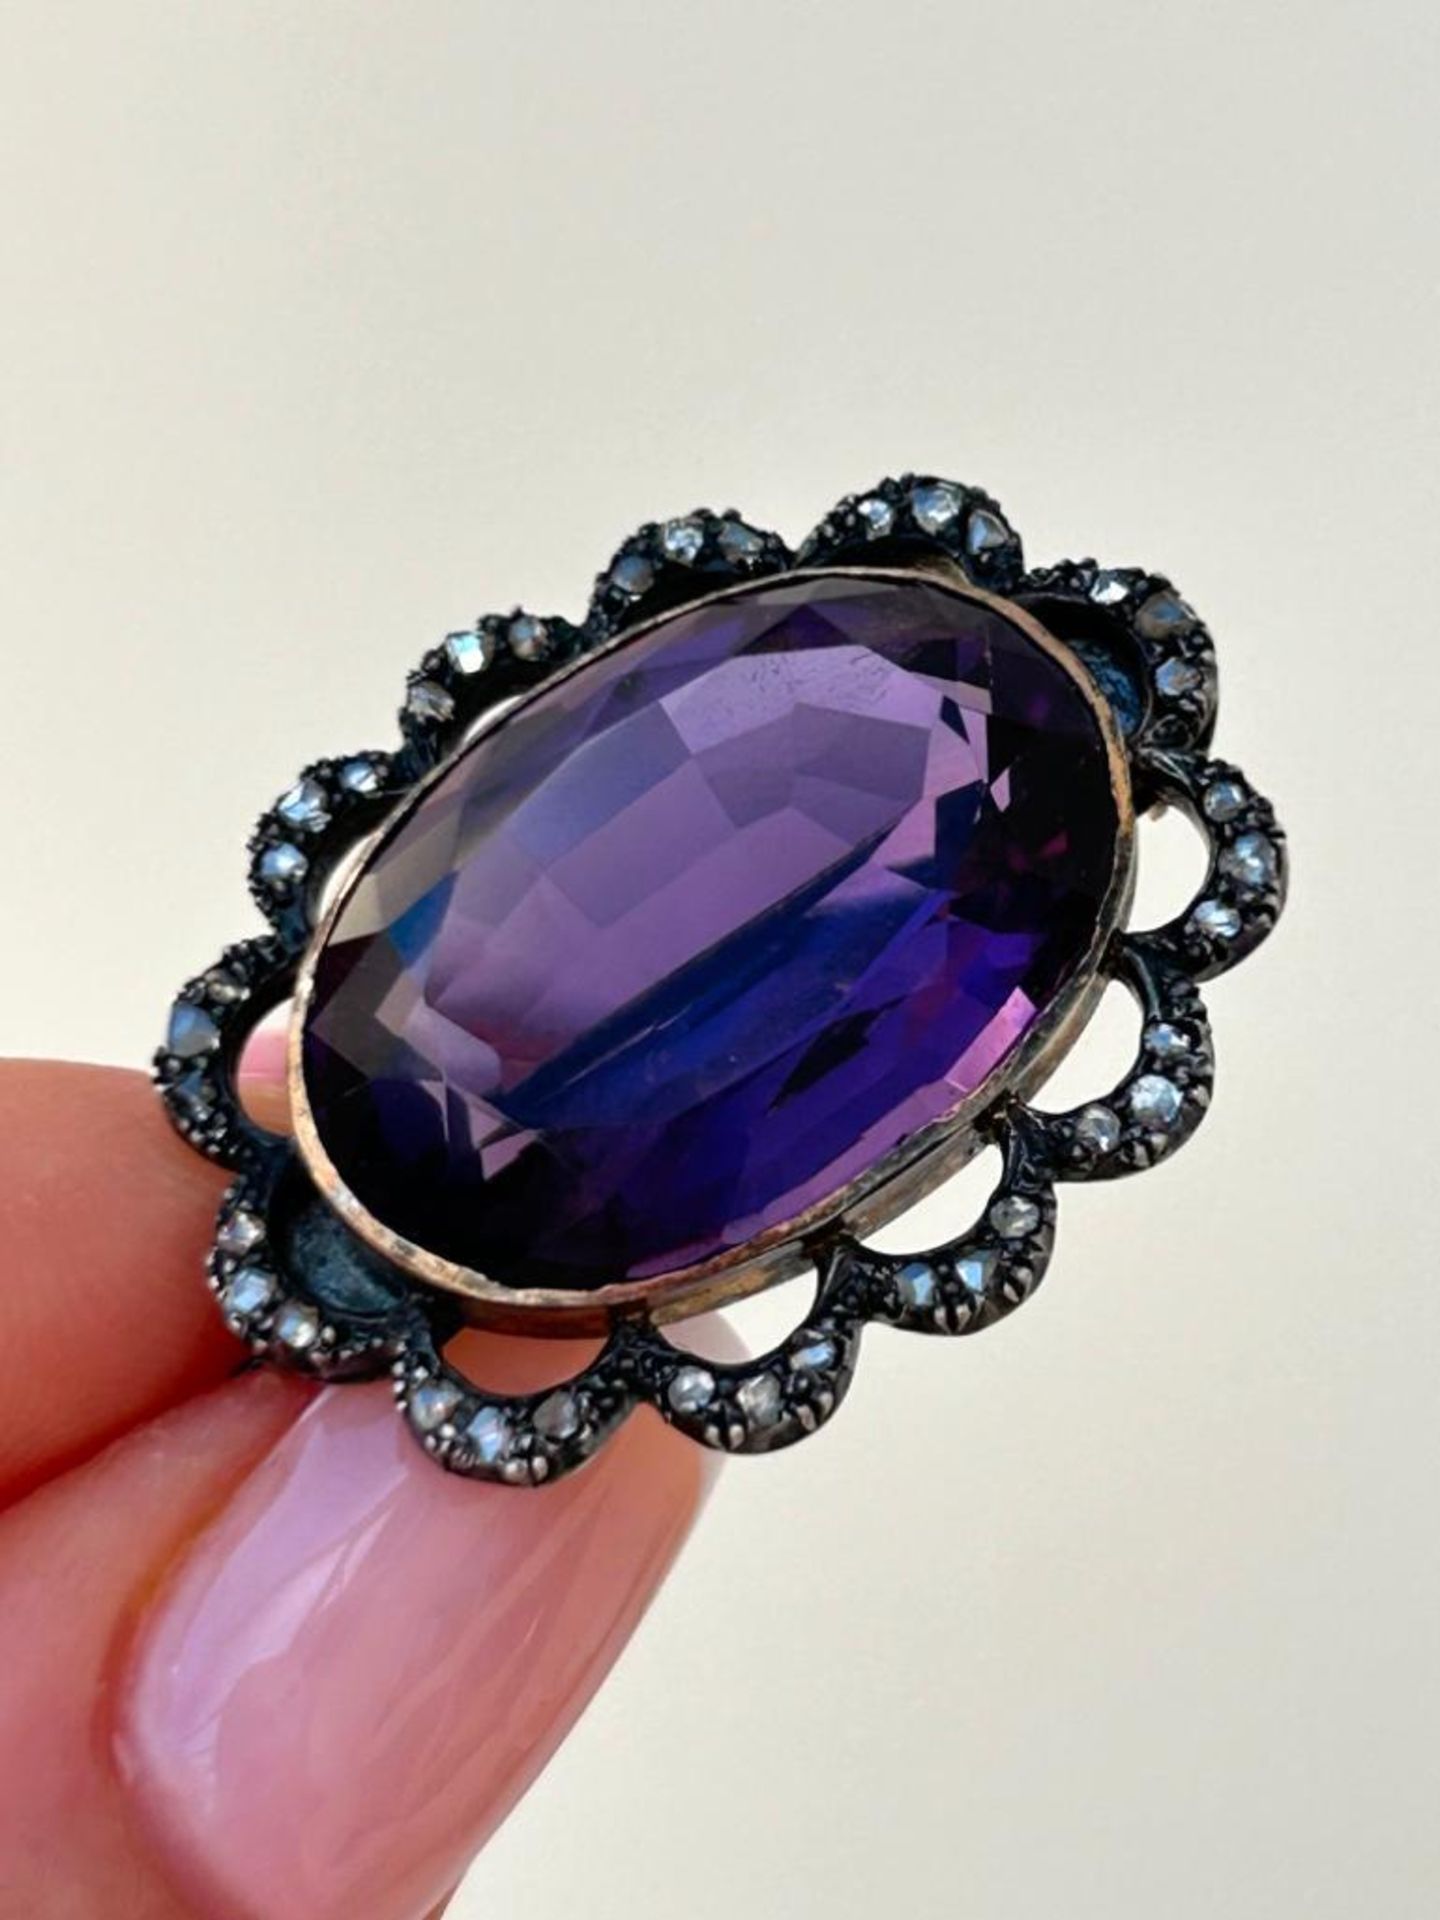 Chunky Antique 19ct Amethyst and Rose Cut Diamond Pretty Brooch in Gold - Image 4 of 7